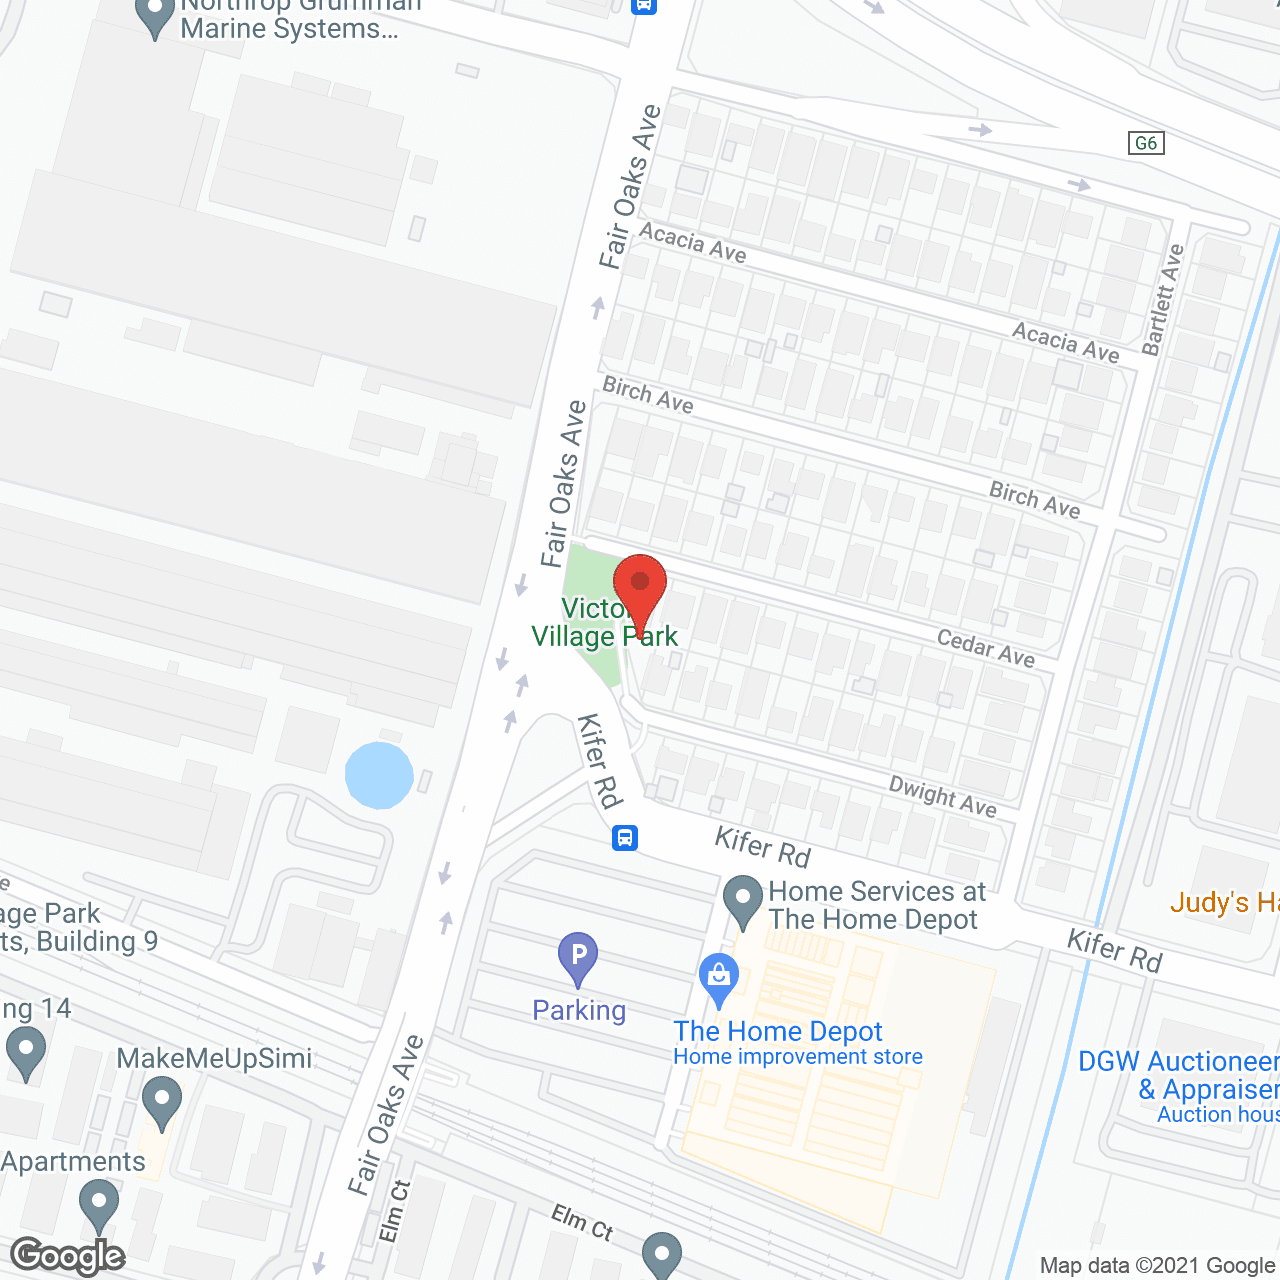 AccentCare of Sunnyvale in google map